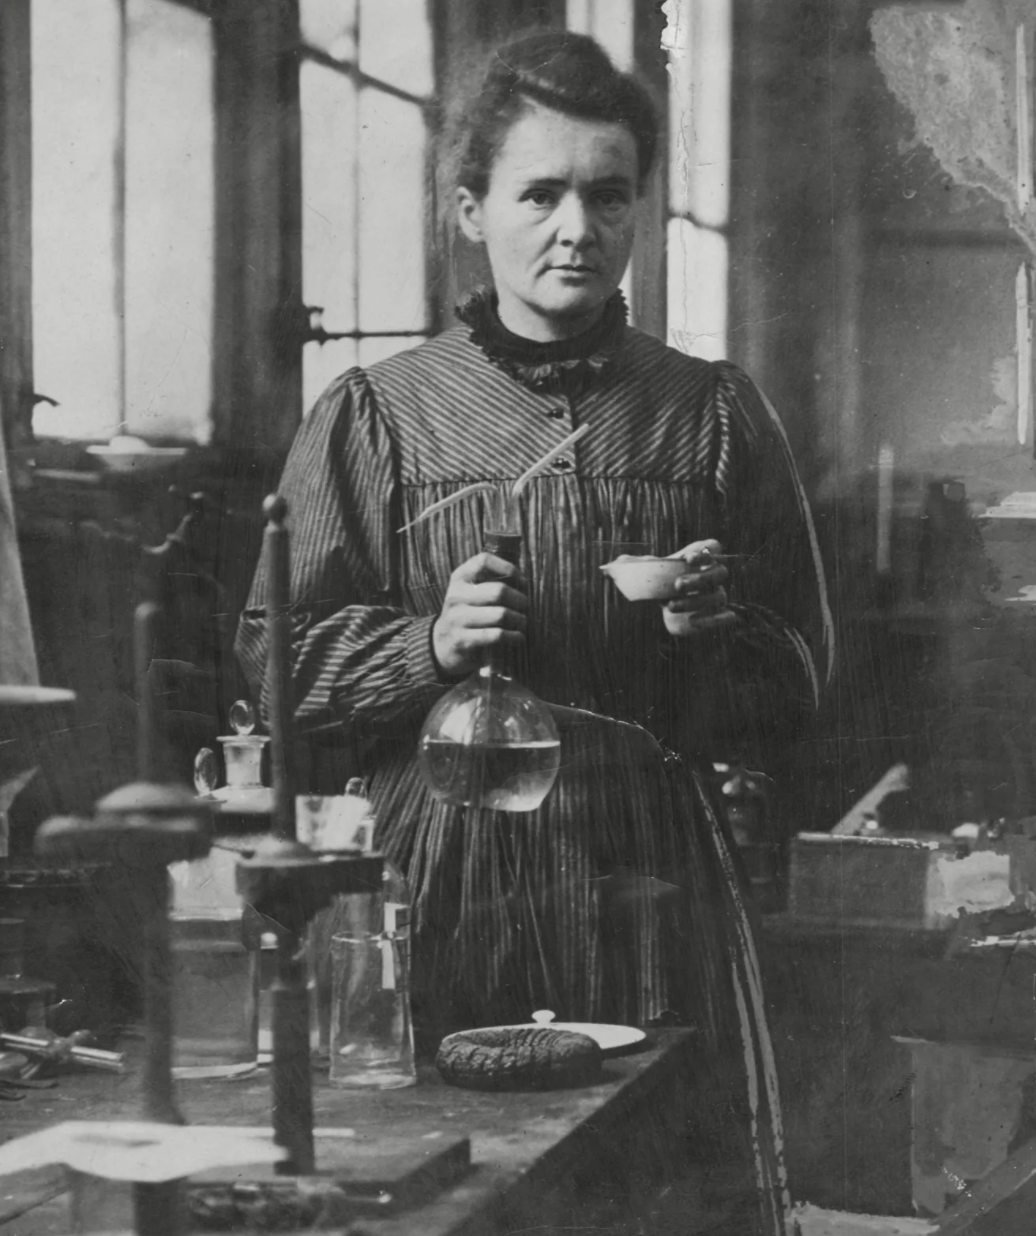 Marie Curie (1867 - 1934)